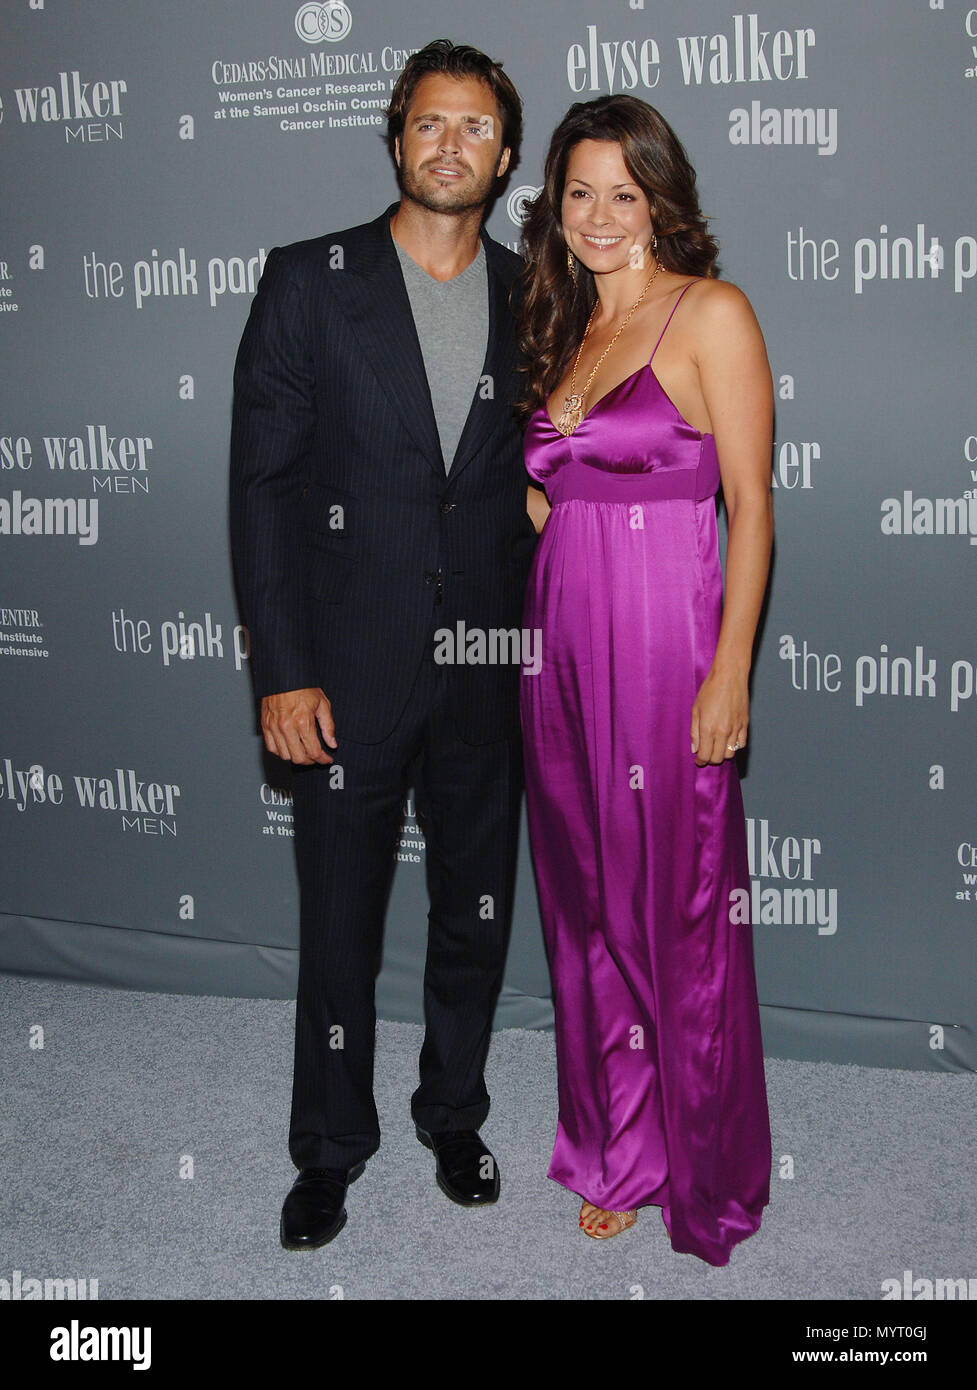 David Charvet and wife Brooke Burke  -  4TH Annual Pink Party To Benefit Cedars-SSinai's Women Cancer Research Institute at the Santa Monica Airport  In Los Angeles.  full length smile CharvetDavid BurkeBrooke 54  Event in Hollywood Life - California, Red Carpet Event, USA, Film Industry, Celebrities, Photography, Bestof, Arts Culture and Entertainment, Celebrities fashion, Best of, Hollywood Life, Event in Hollywood Life - California, Red Carpet and backstage, Music celebrities, Topix, Couple, family ( husband and wife ) and kids- Children, brothers and sisters inquiry tsuni@Gamma-USA.com, Cr Stock Photo